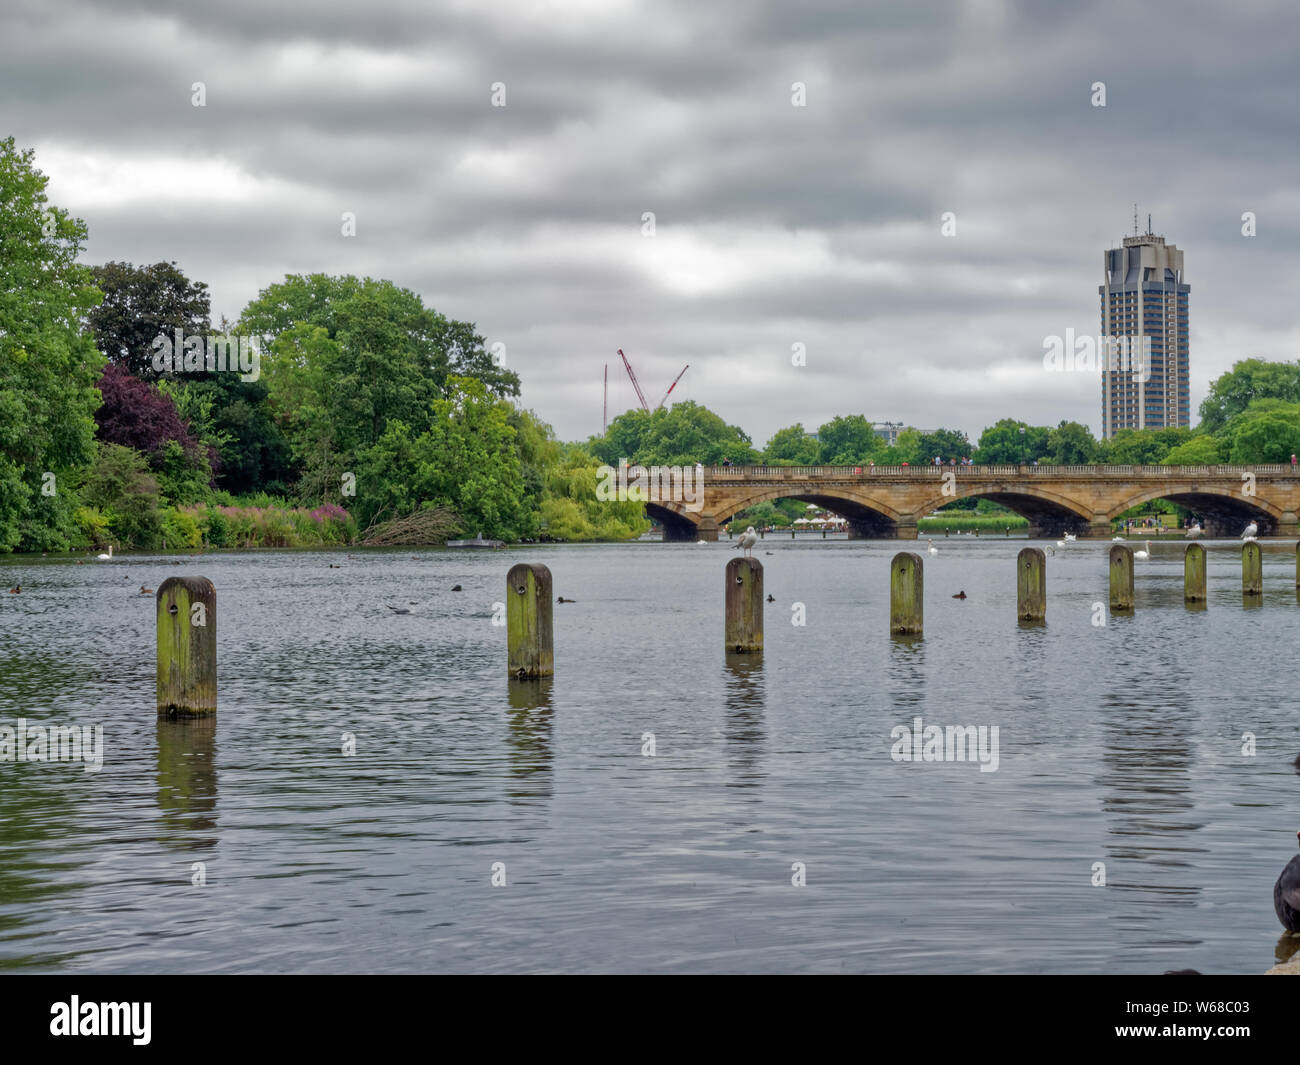 The Long Water in Kensington Gardens, an urban green space in London leading to the Sepentine Bridge and the city skyline in the distance Stock Photo